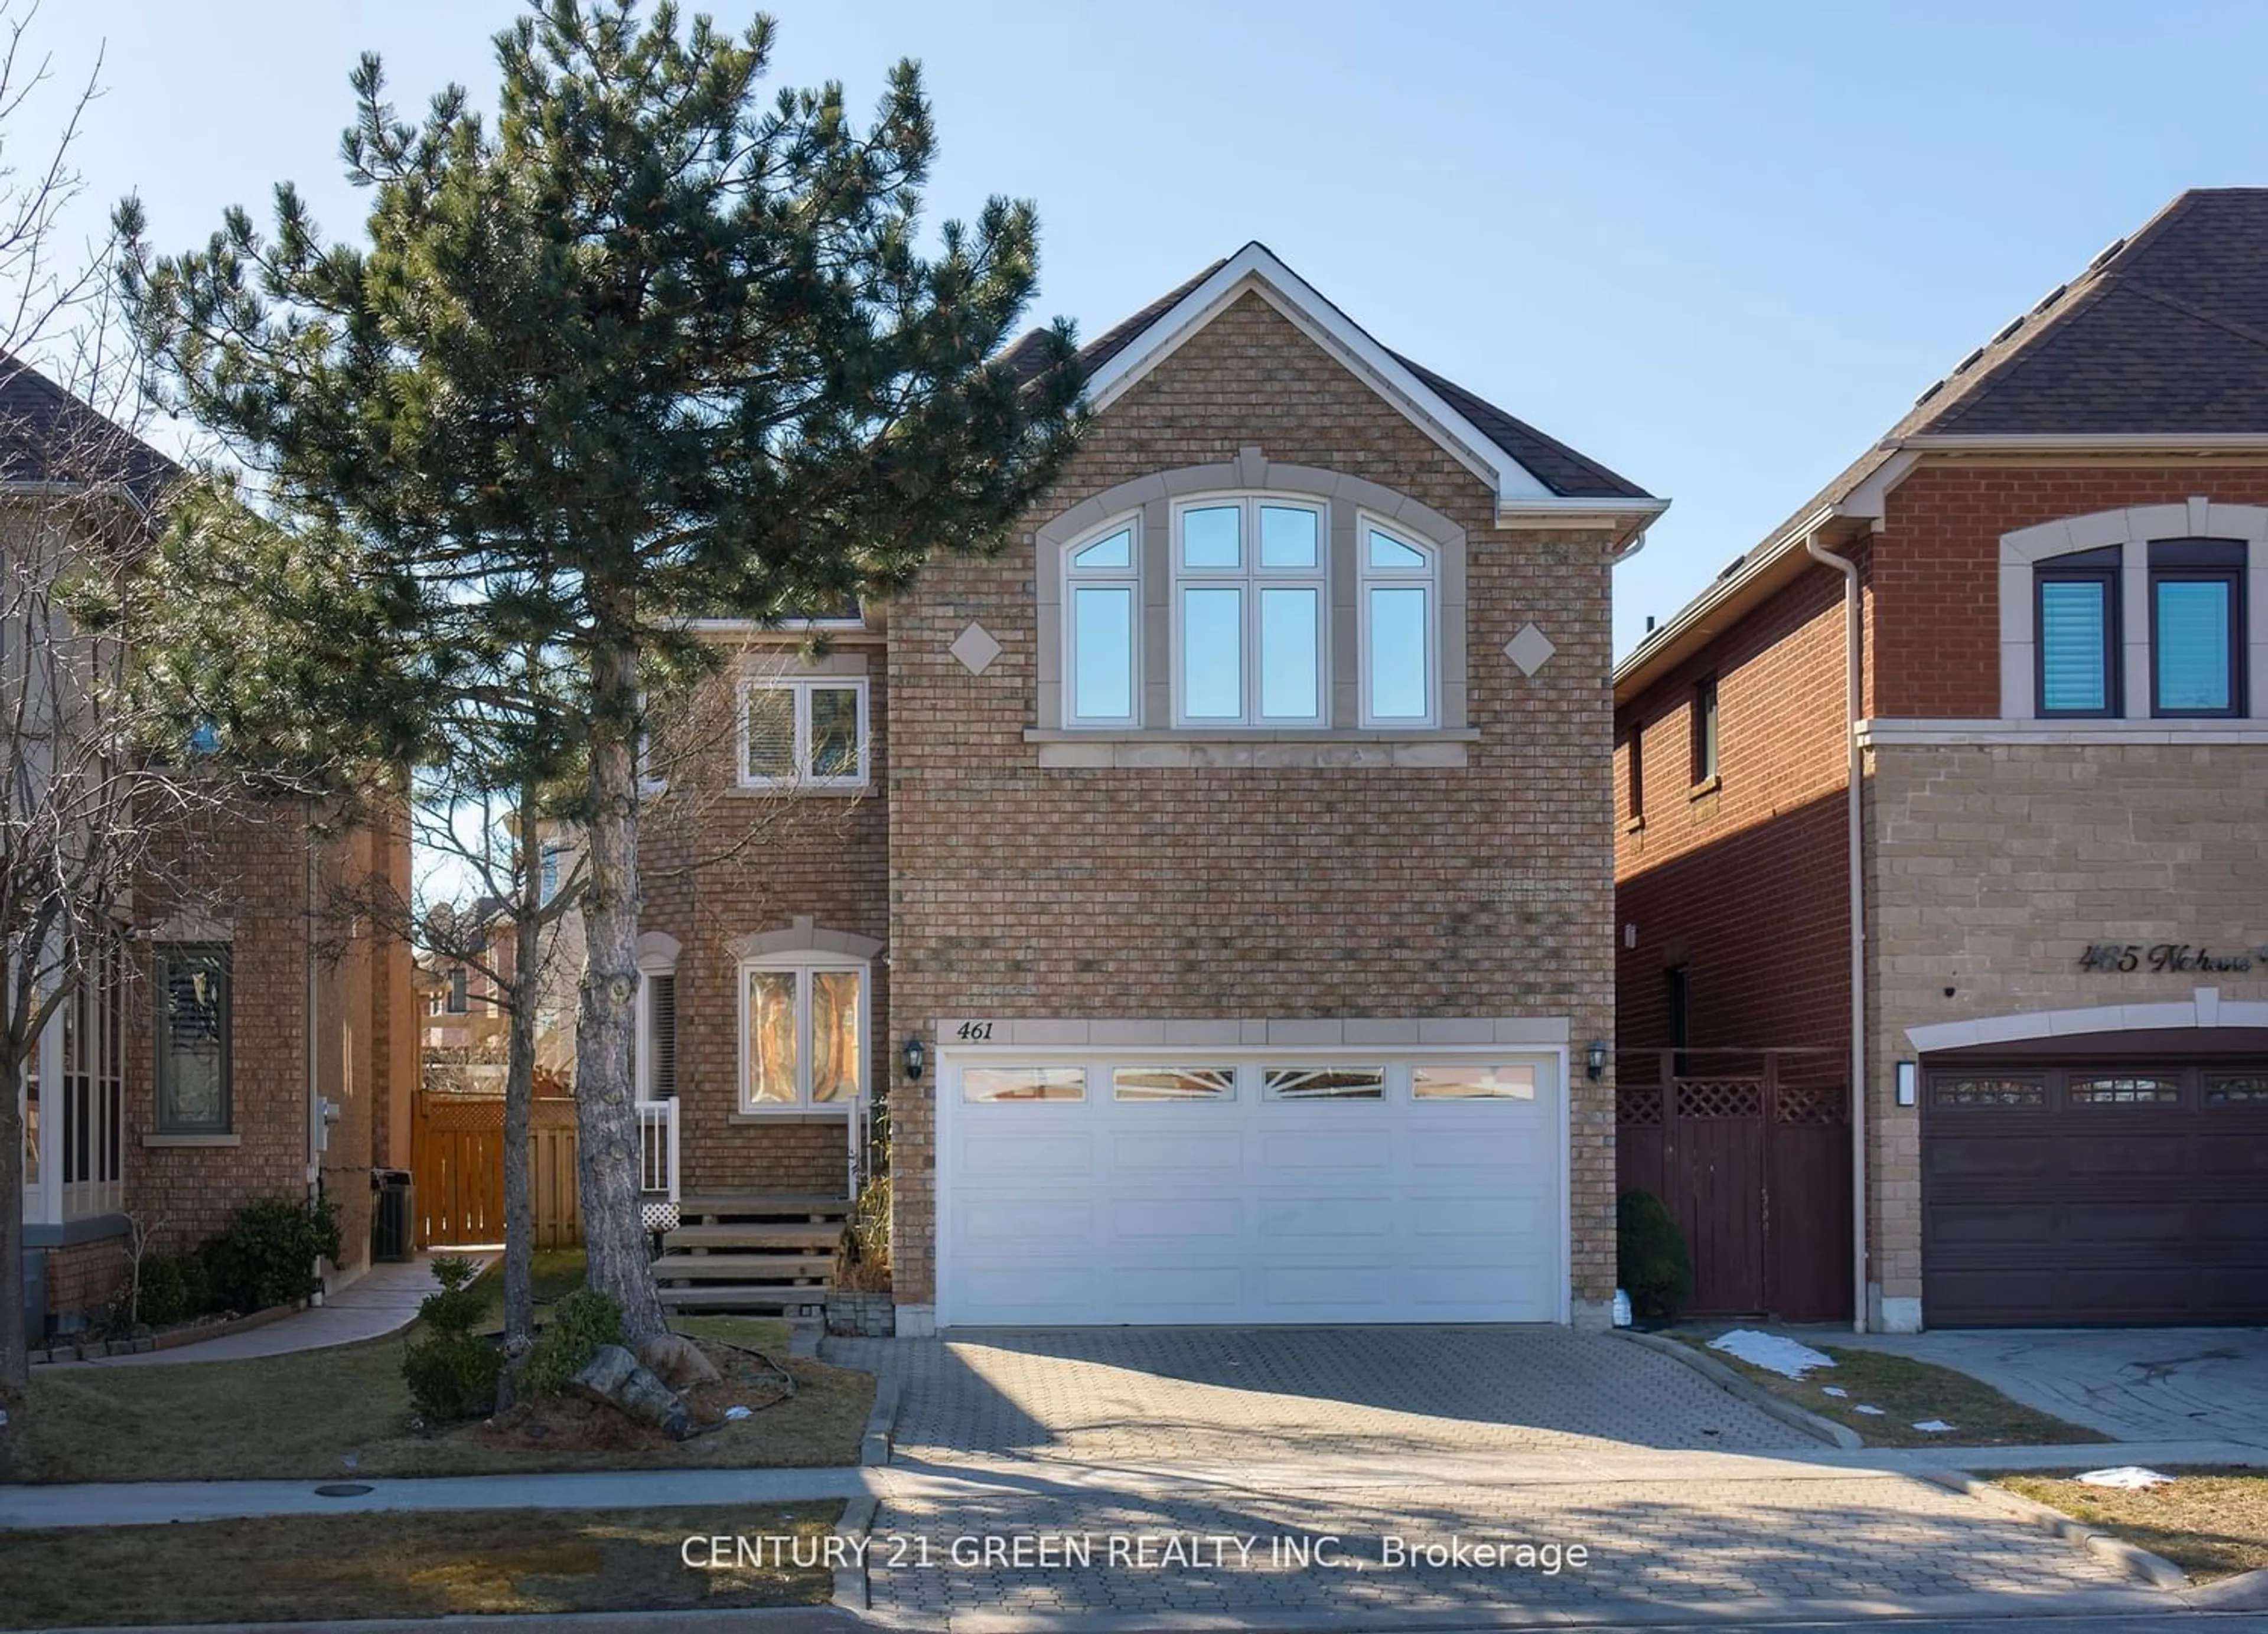 Home with brick exterior material for 461 Nahani Way, Mississauga Ontario L4Z 3V7